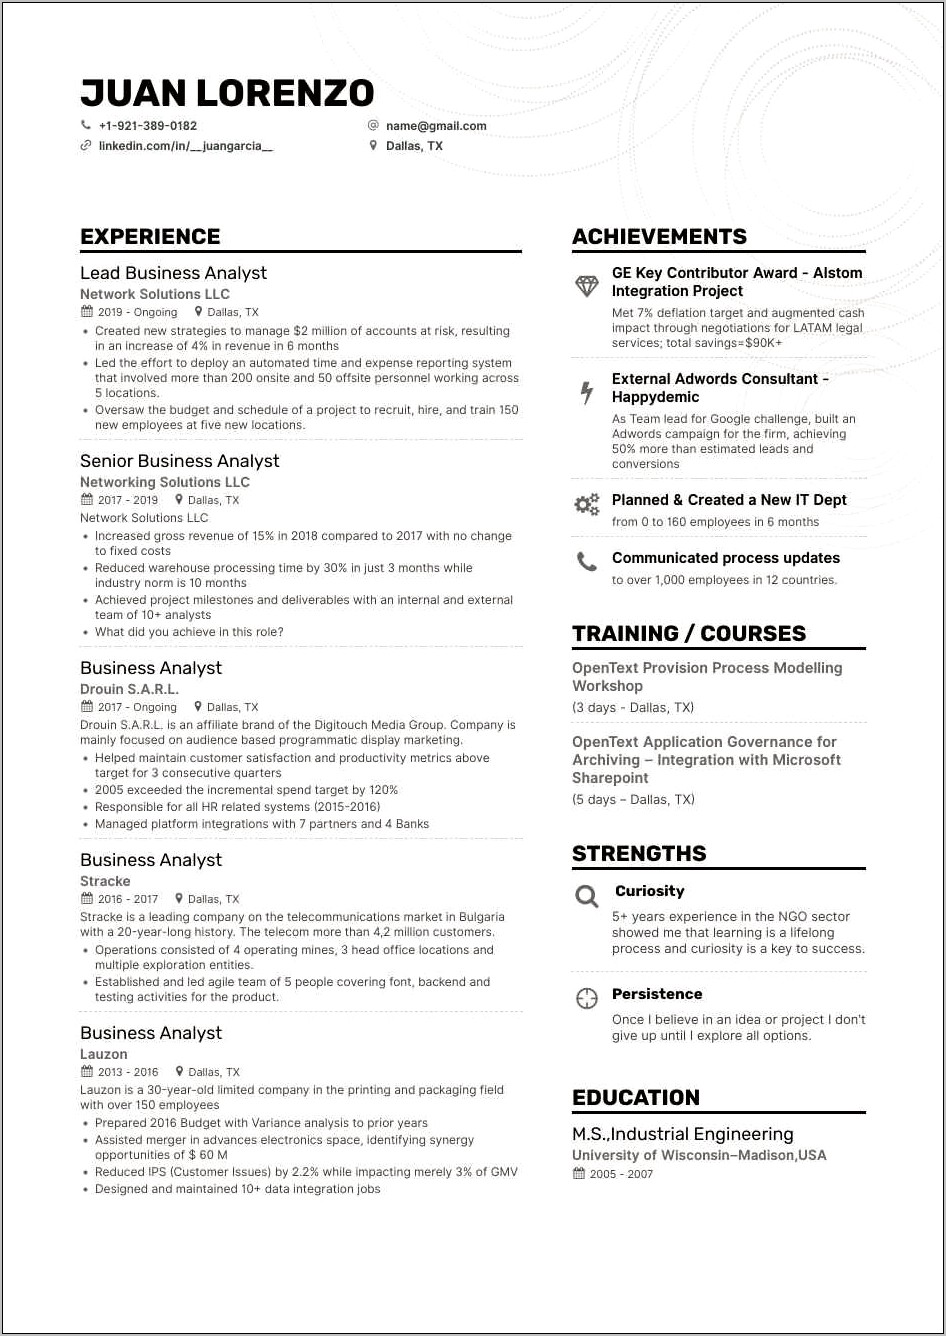 Multiple Jobs At 1 Company Resume